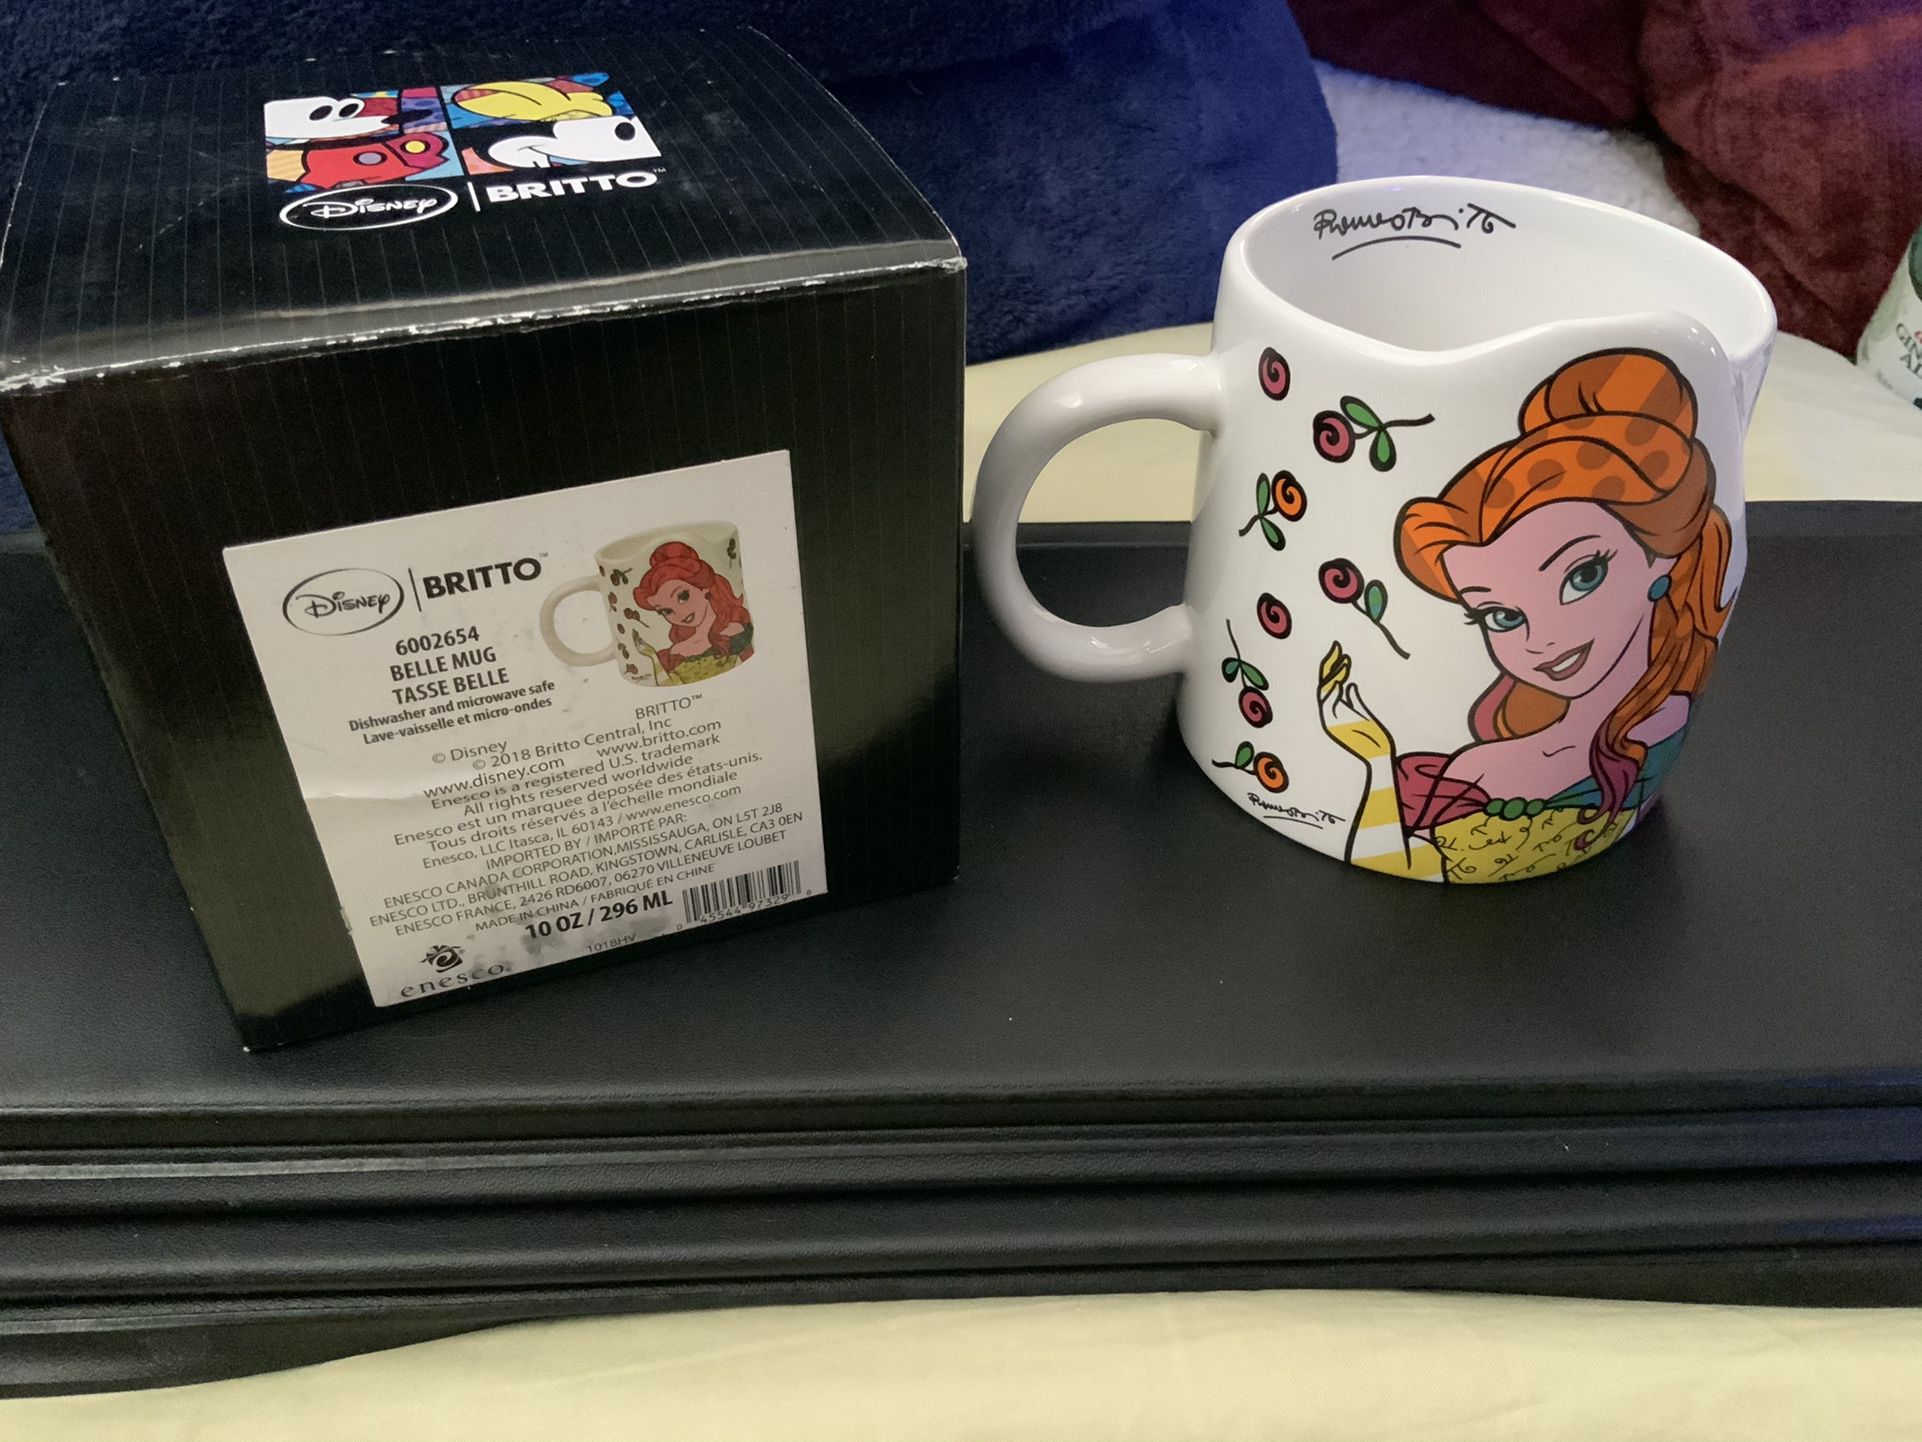 NEW Enesco Disney by Britto Beauty and The Beast Belle Coffee Mug 10 oz. Multicolor in Original Box ( took out of box for photos only)